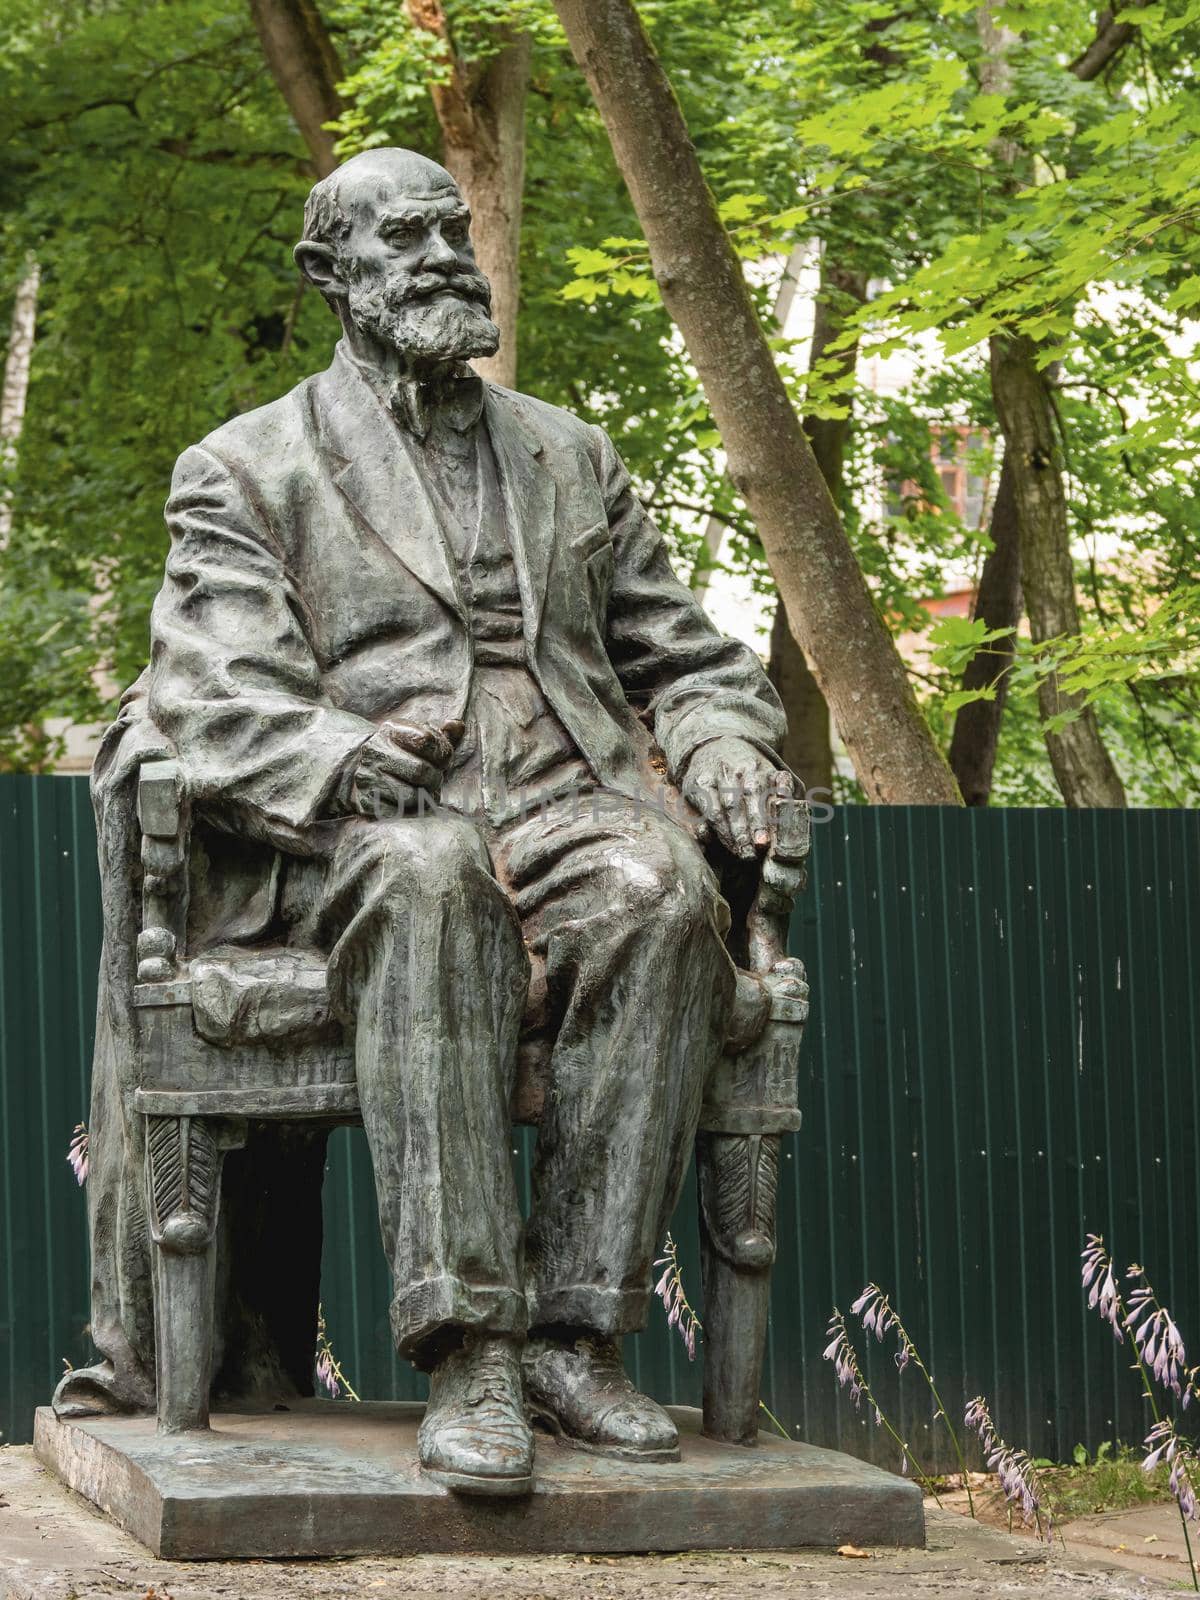 SVETLOGORSK, RUSSIA - July 21, 2019. Monument to famous Russian scientist and physiologist Pavlov I.P.